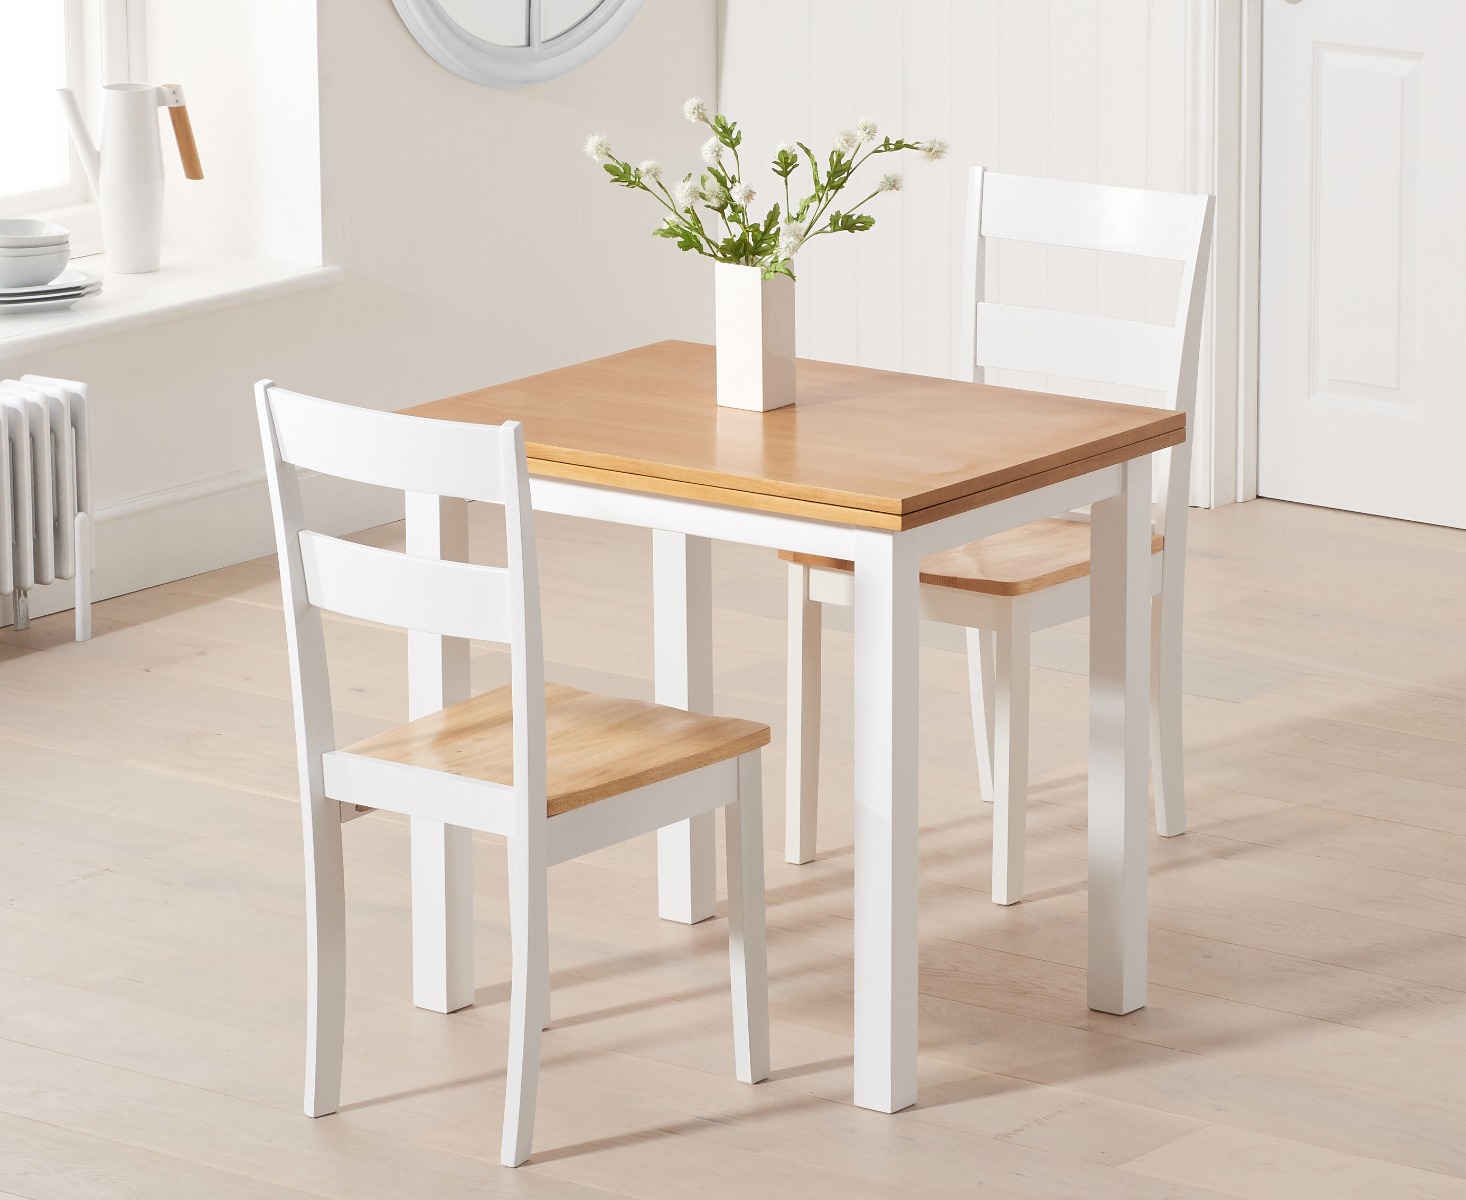 Hastings Extending White And Oak Painted Table With 2 Oak And White Chiltern Chairs